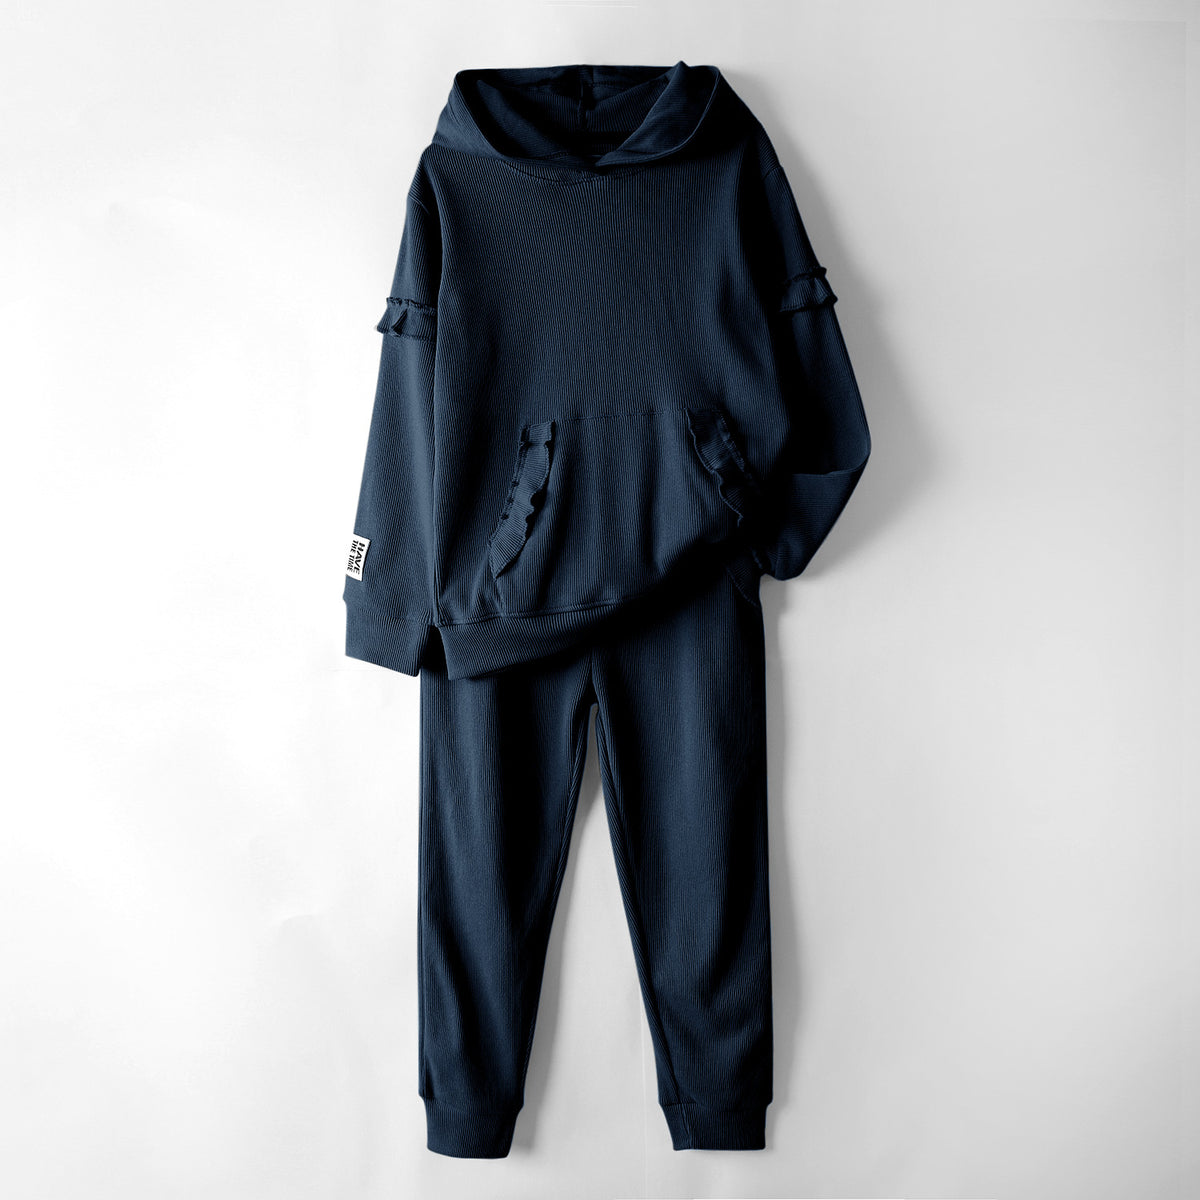 Premium Quality 2 Piece Frill Navy Tracksuit For Girls